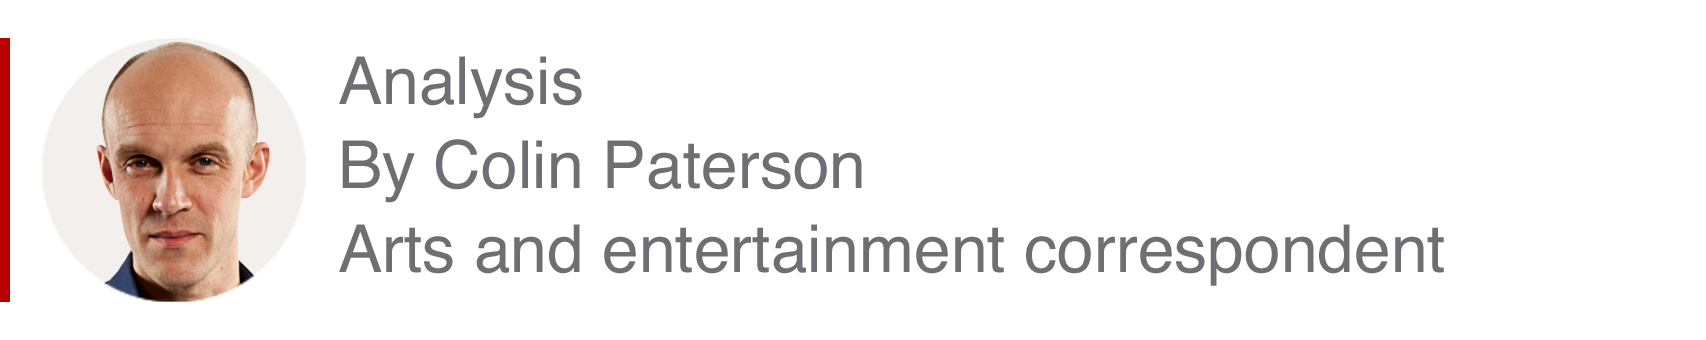 Analysis box by Colin Paterson, arts and entertainment correspondent